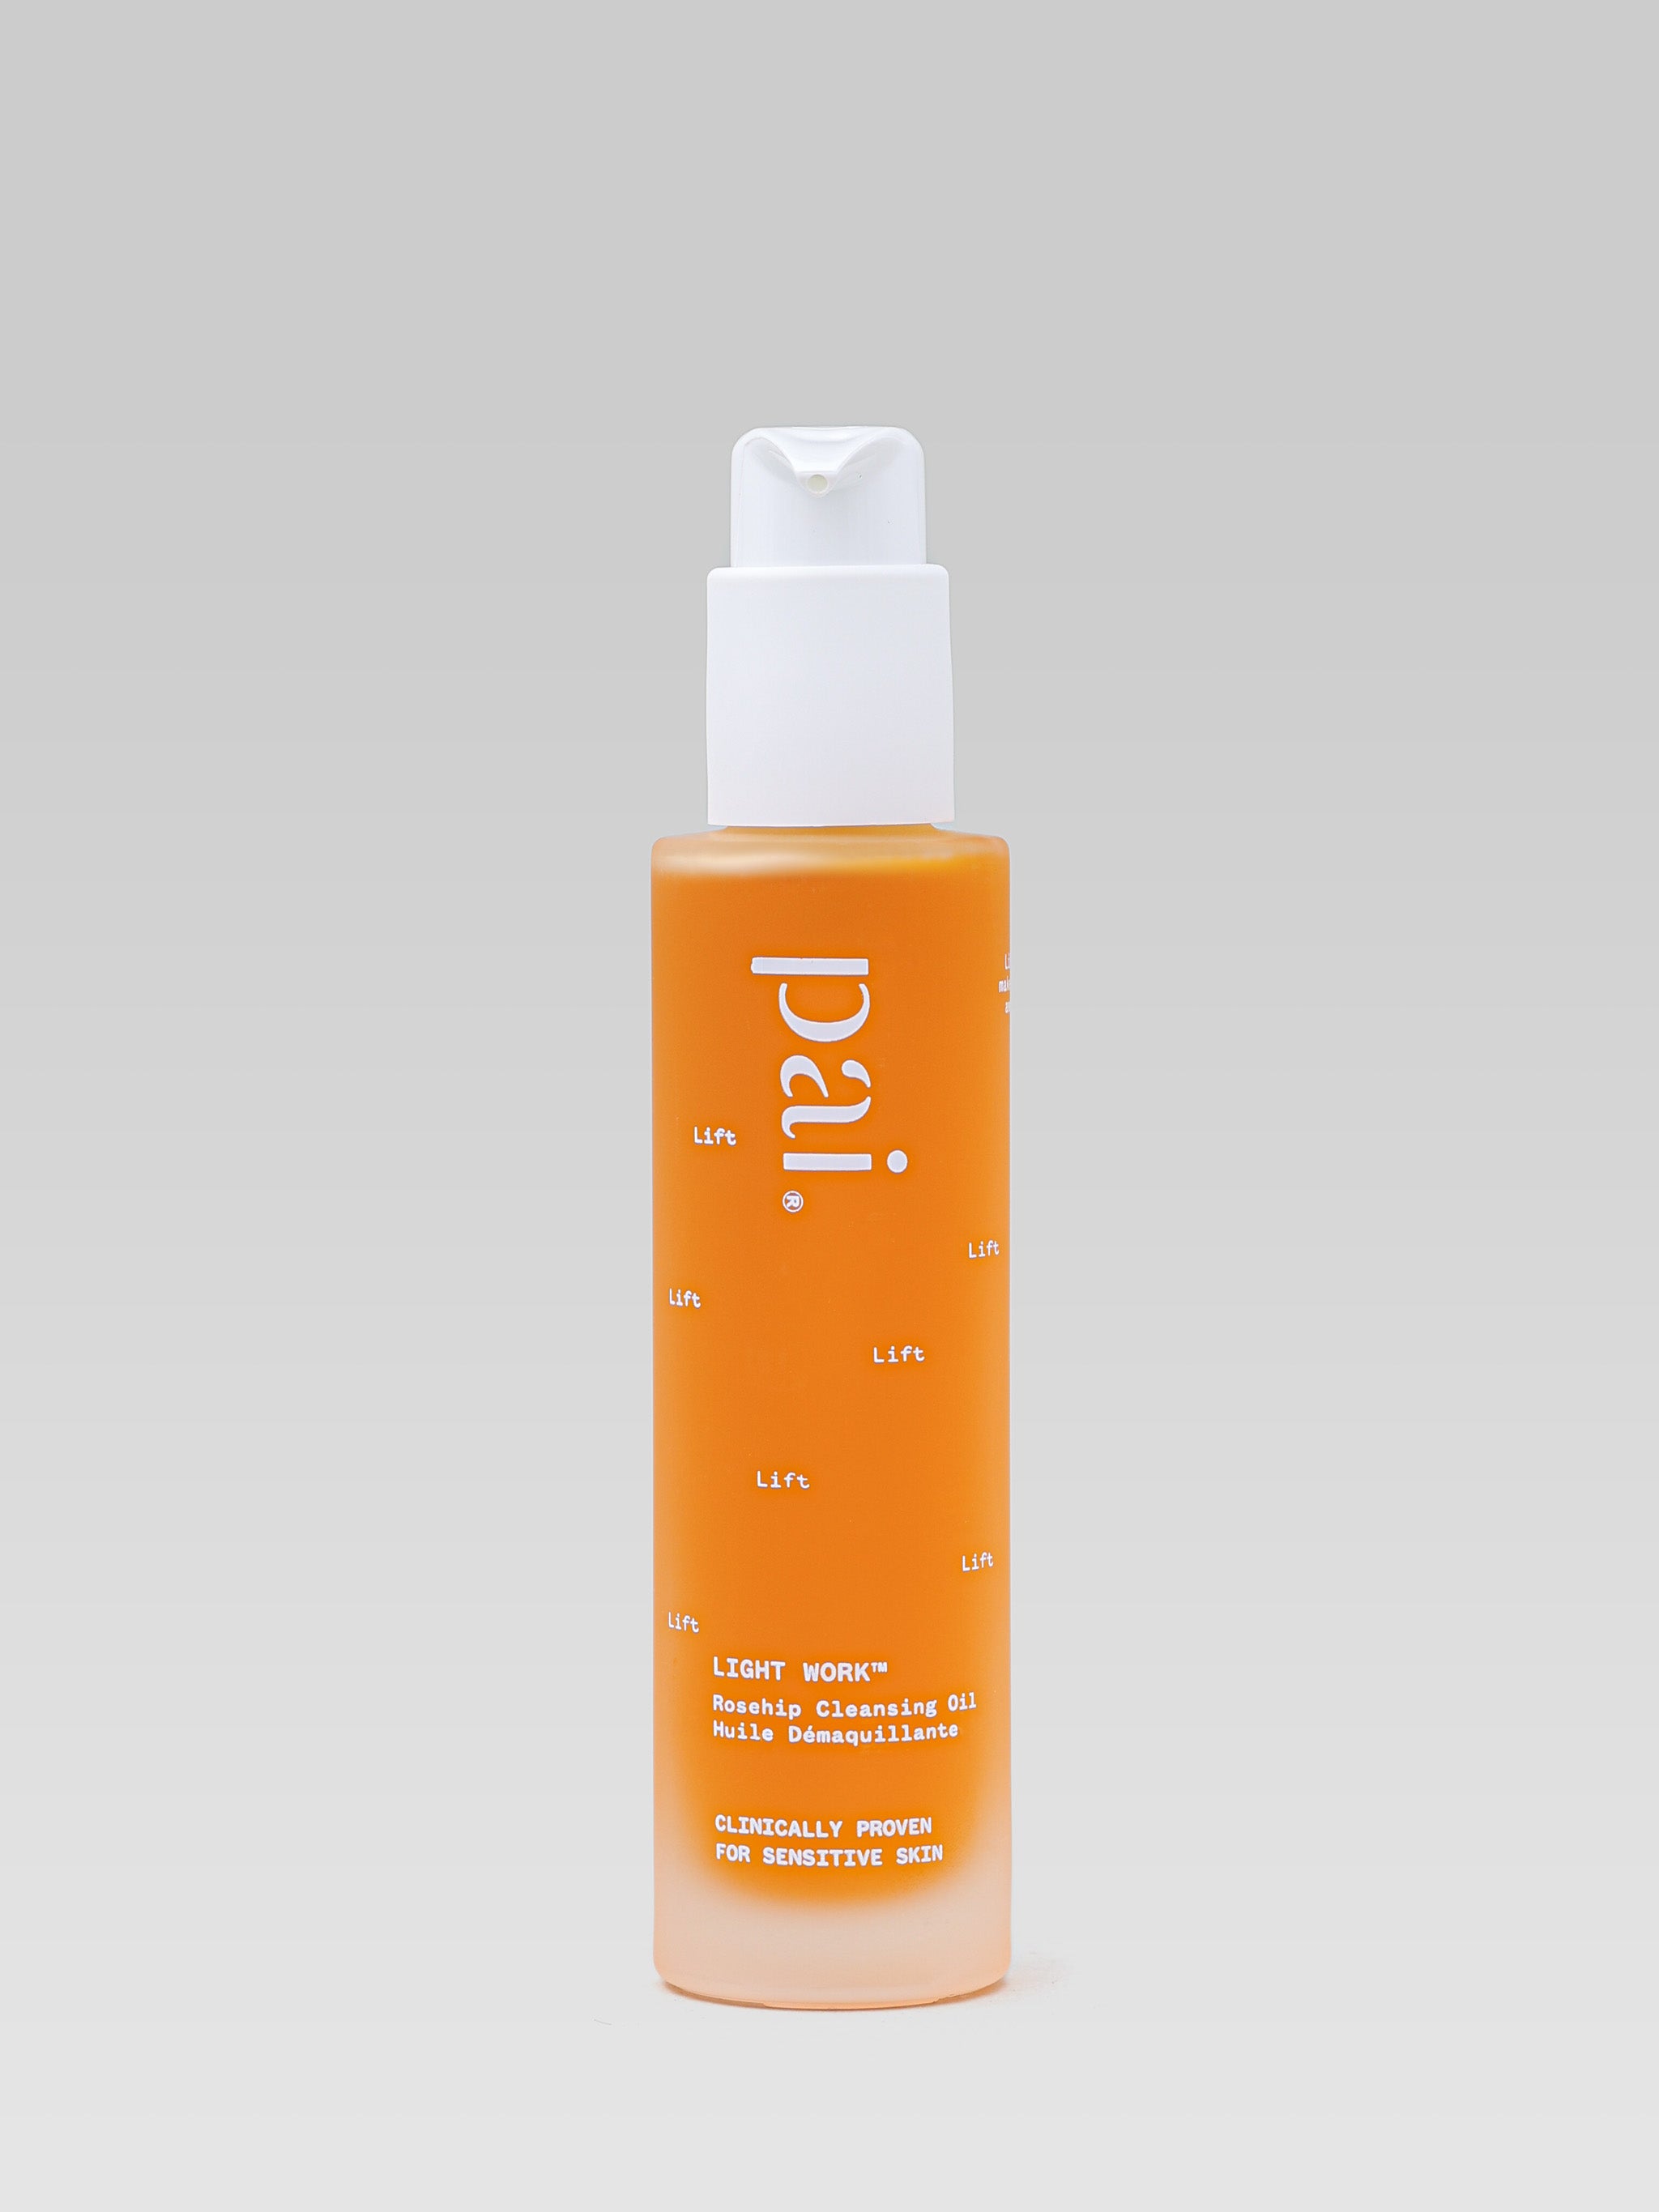 Pai Skincare Light Work Cleansing Oil product shot